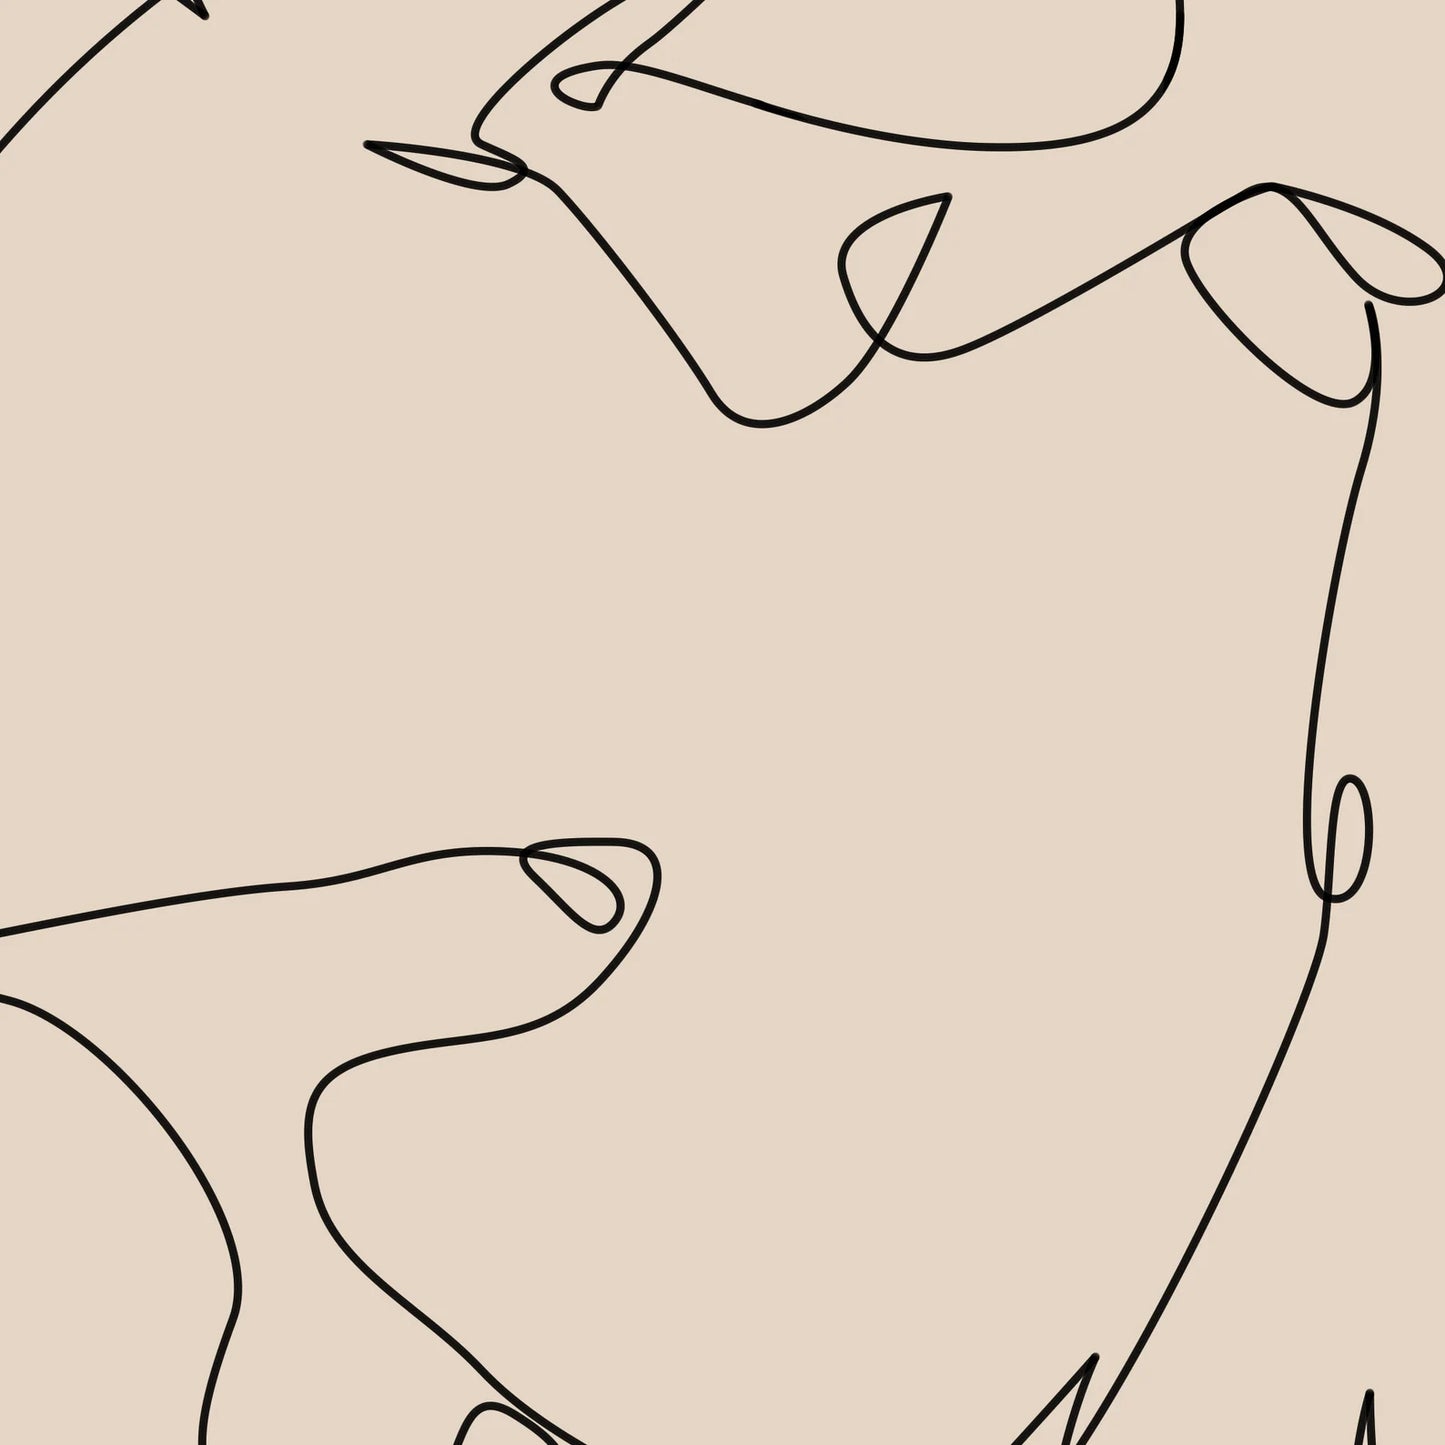 Erotic Gay Abstract Line Drawing, Male Figure Sketch